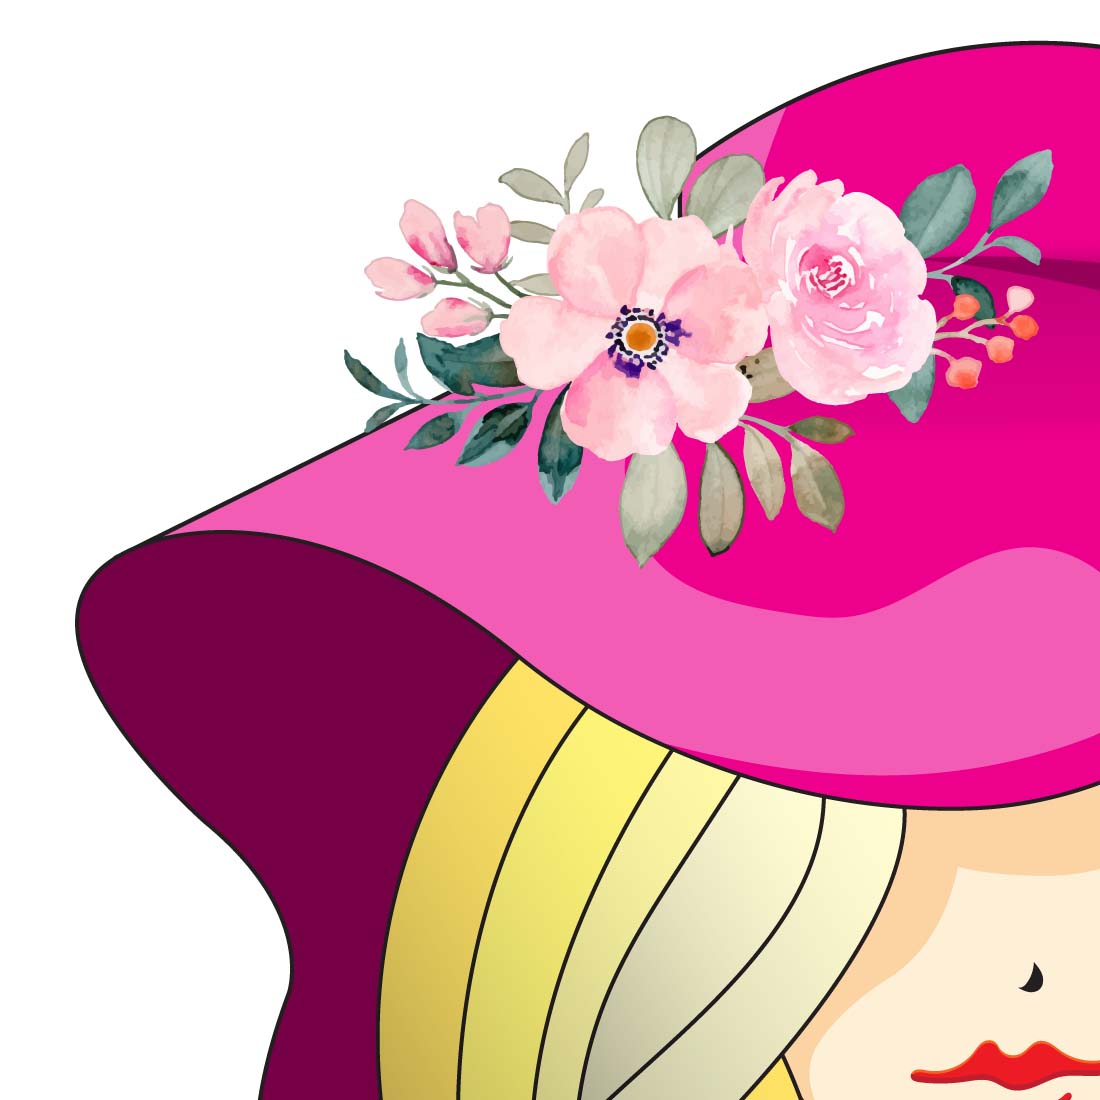 women face illustration 01 preview image.